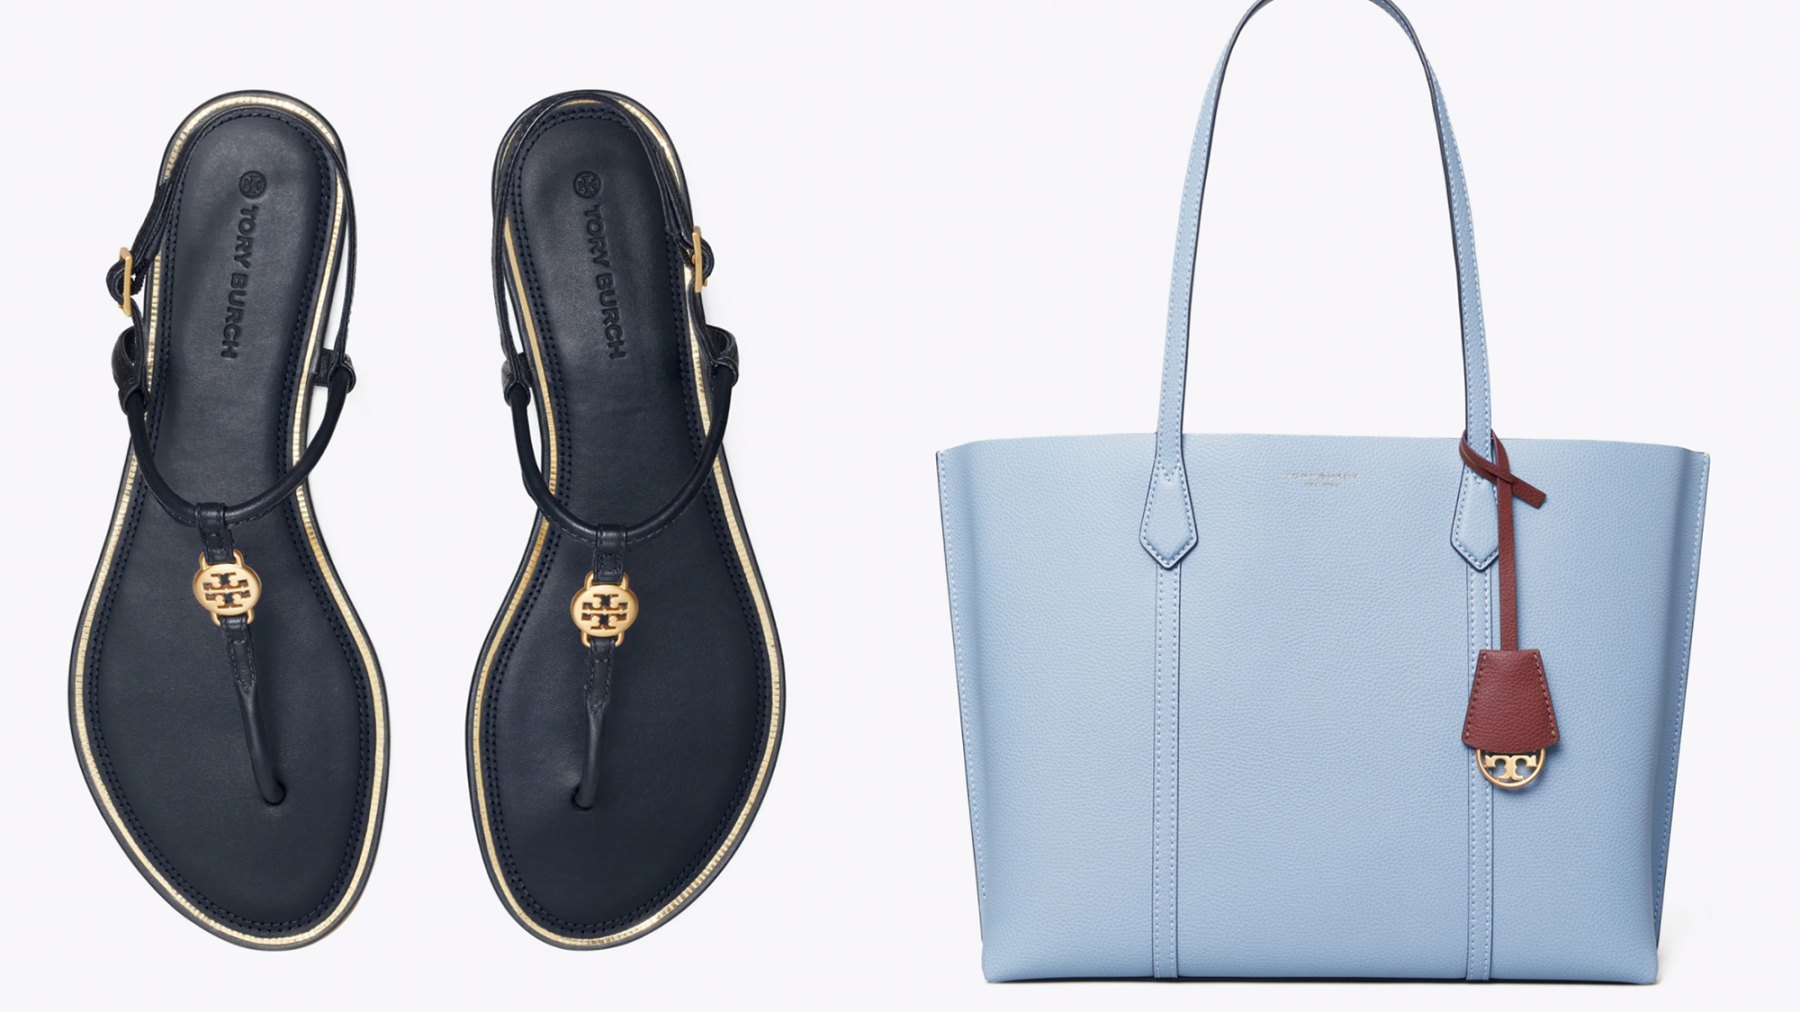 Tory Burch Has Sandals and Accessories on Sale Starting at $9 | Us Weekly